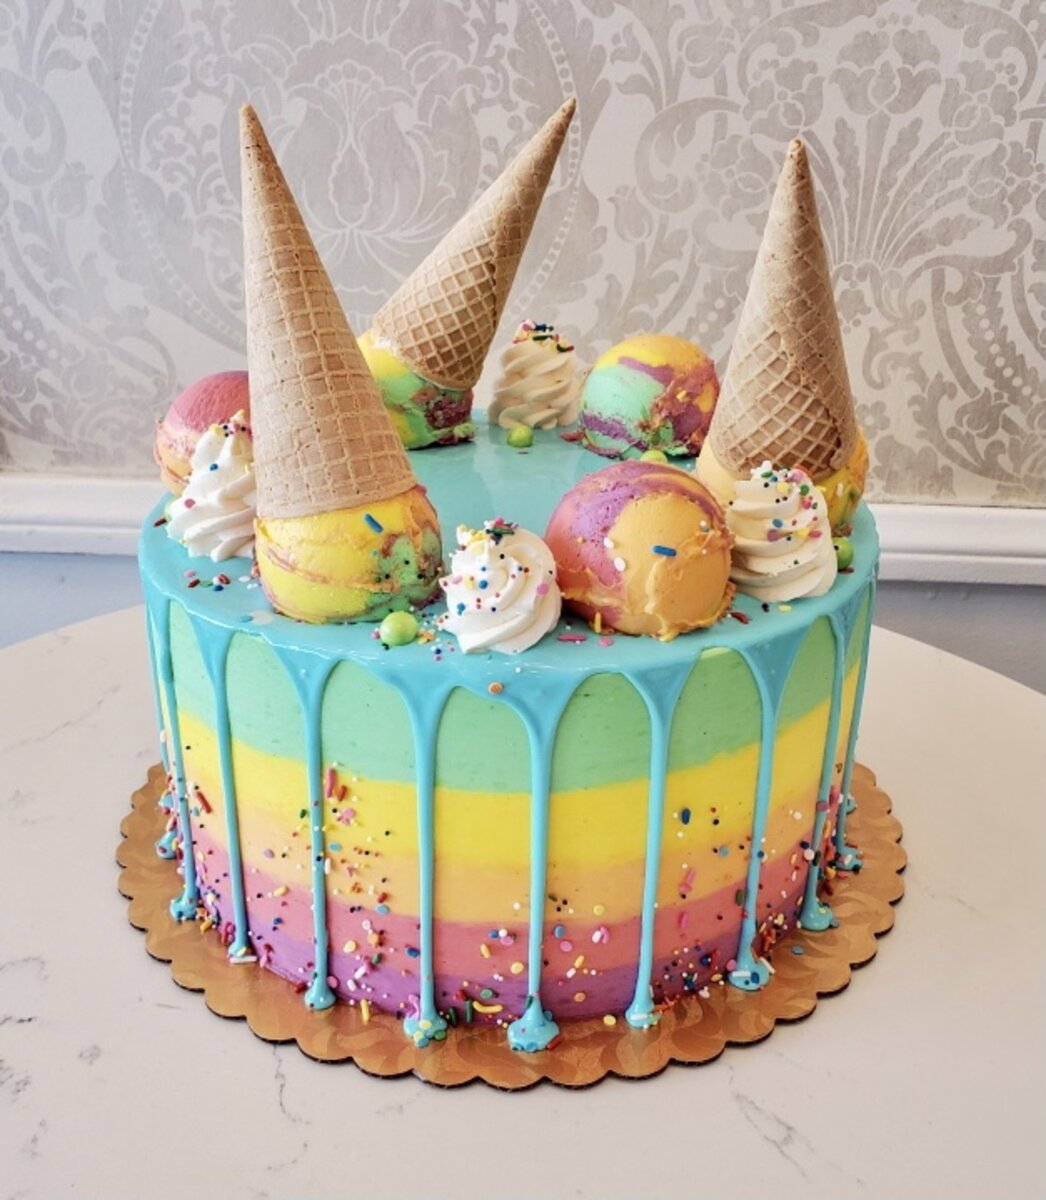 The Ice Cream Cafe - Need an Ice Cream Cake Last Minute? We Have Stock Cakes!  Forgot an important birthday, anniversary or other occasion? No problem! We  have the following stock ice